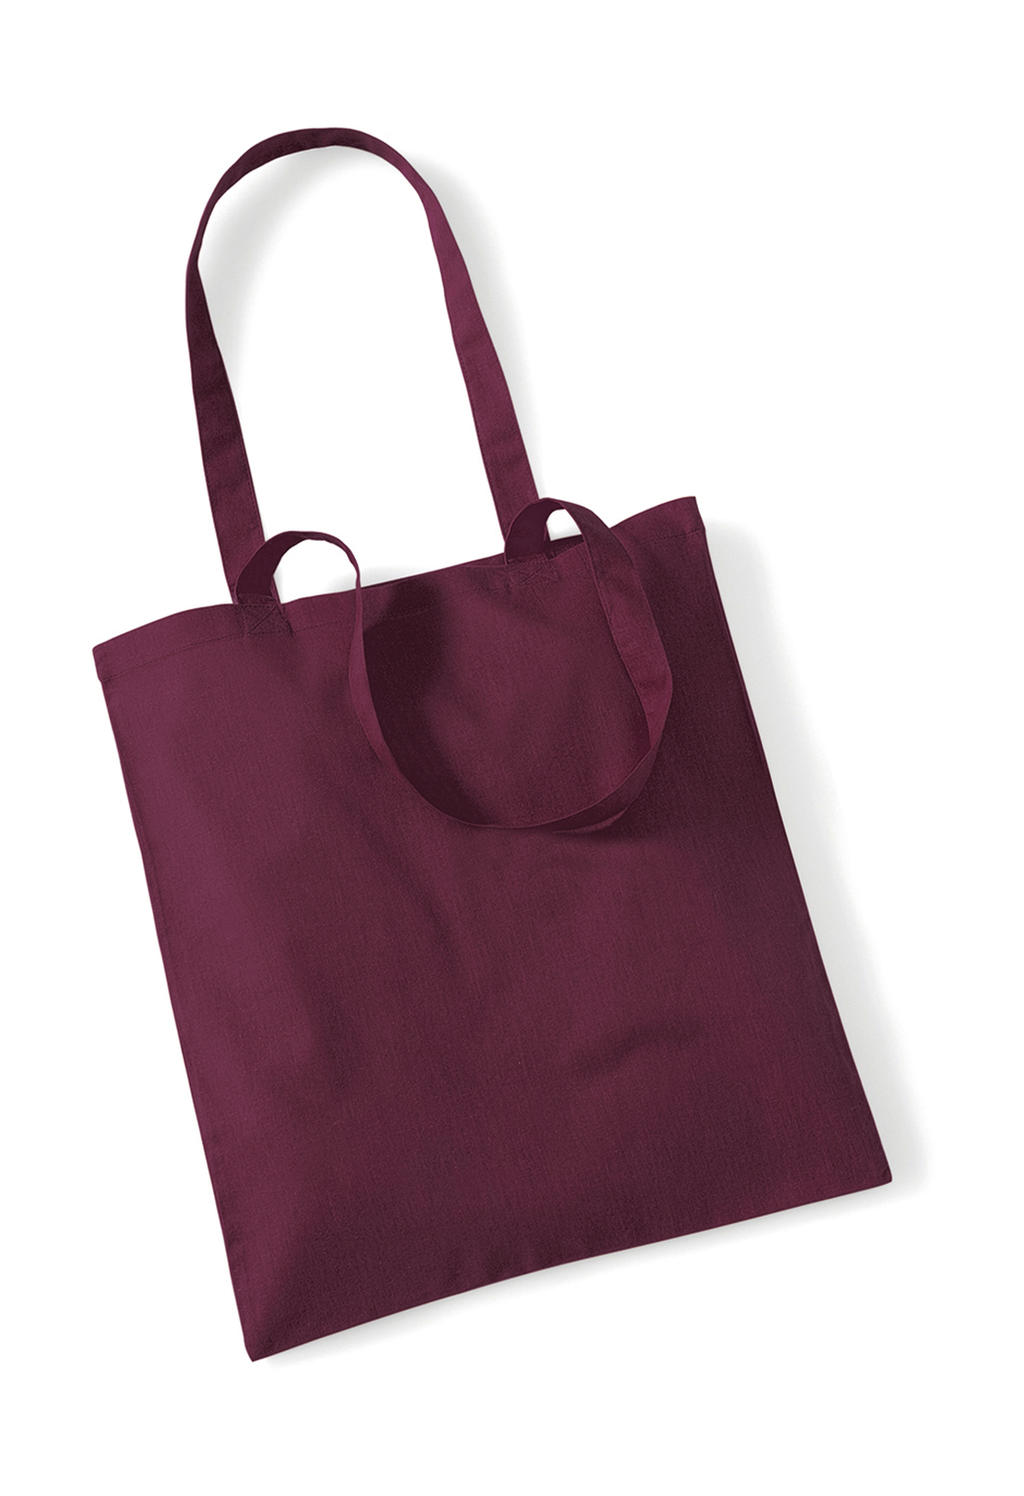  Bag for Life - Long Handles in Farbe Burgundy